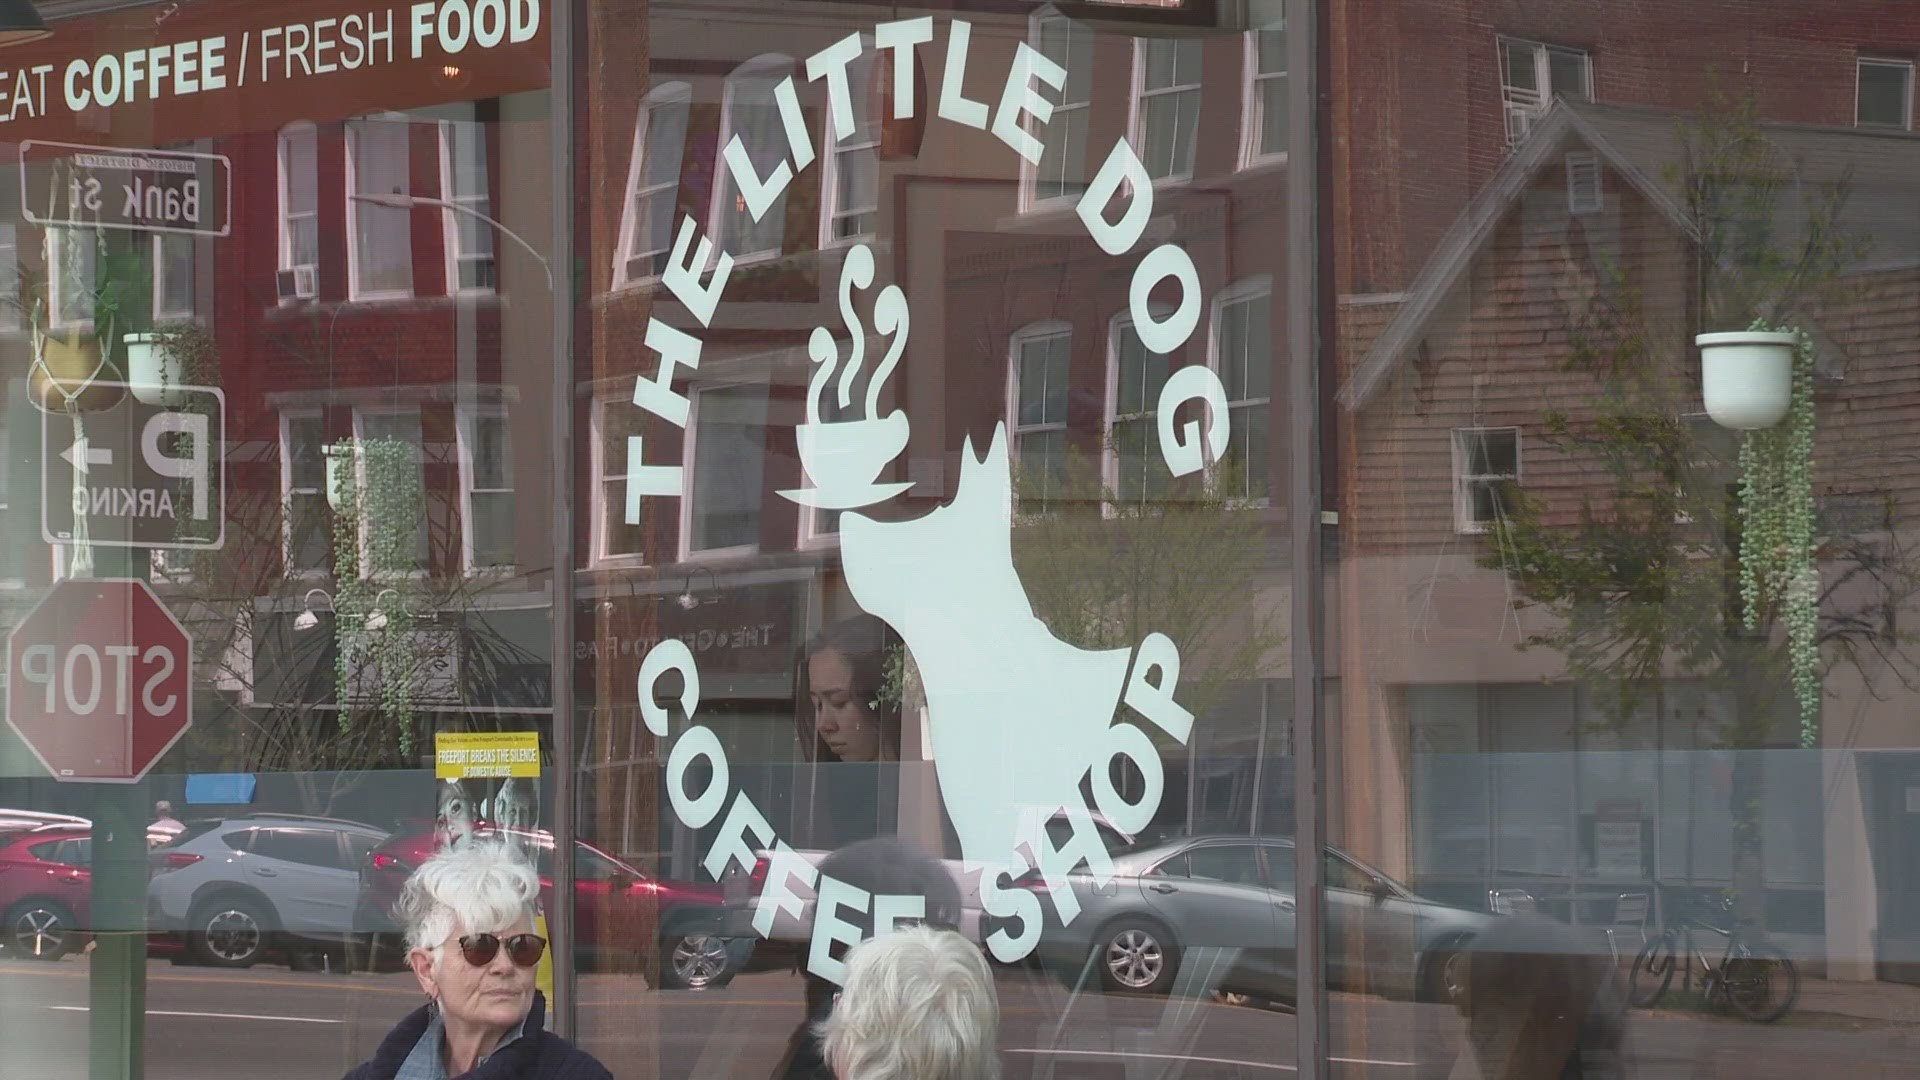 Employees at Little Dog Coffee Shop in Brunswick held a one-day strike, and have filed multiple complaints with the National Labor Relations Board.